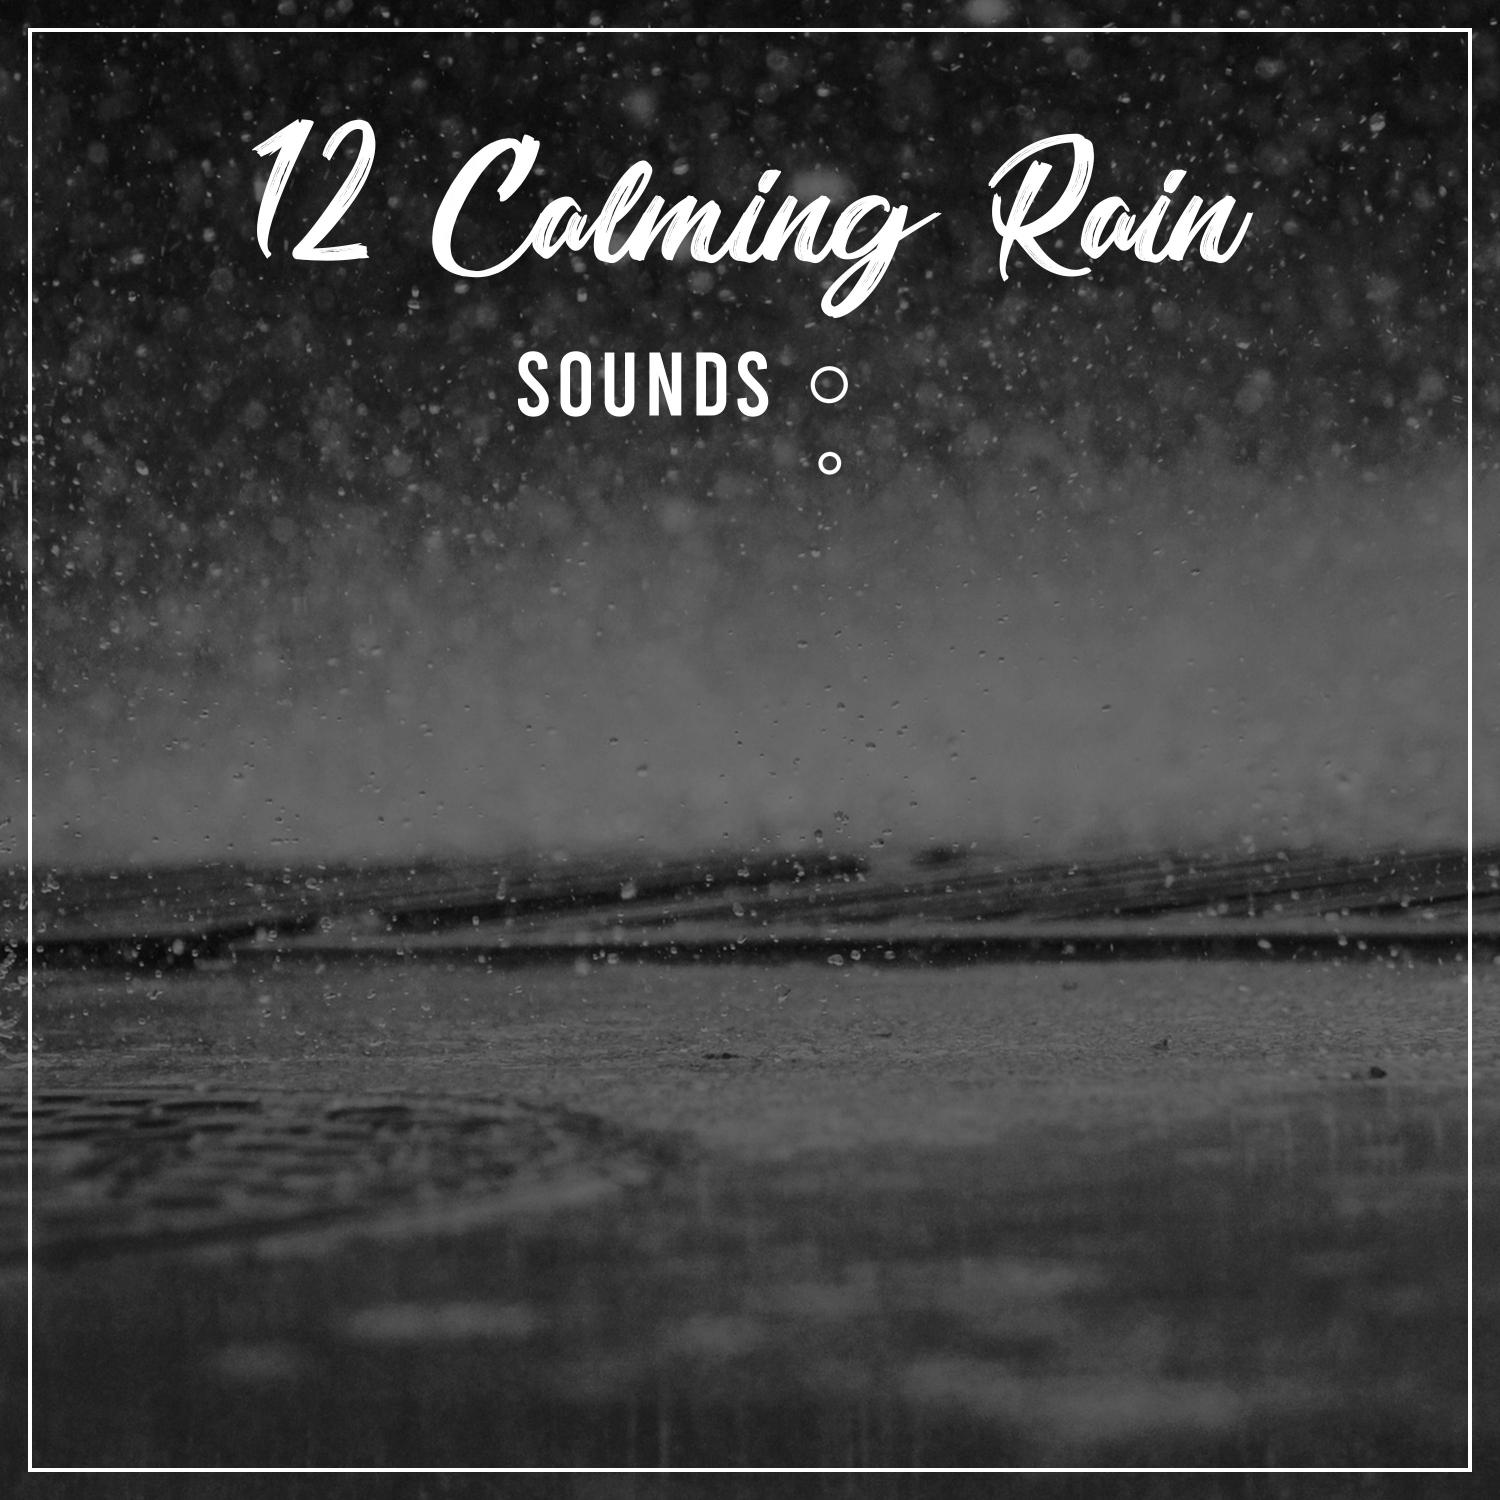 12 Calming Rain and Running Water Sounds